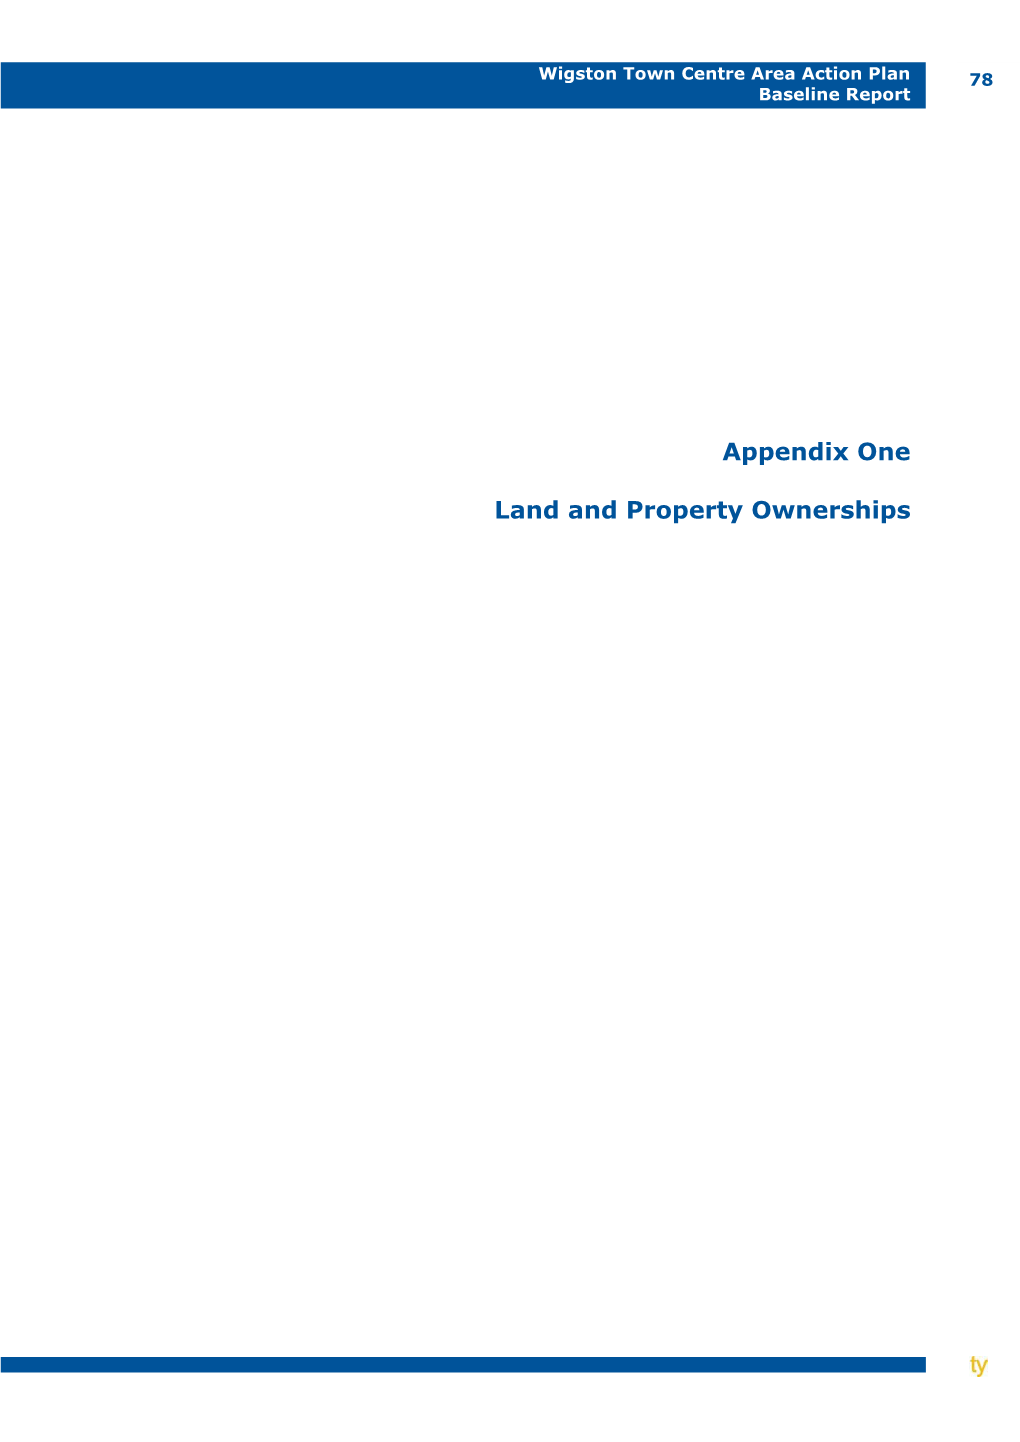 Appendix One Land and Property Ownerships